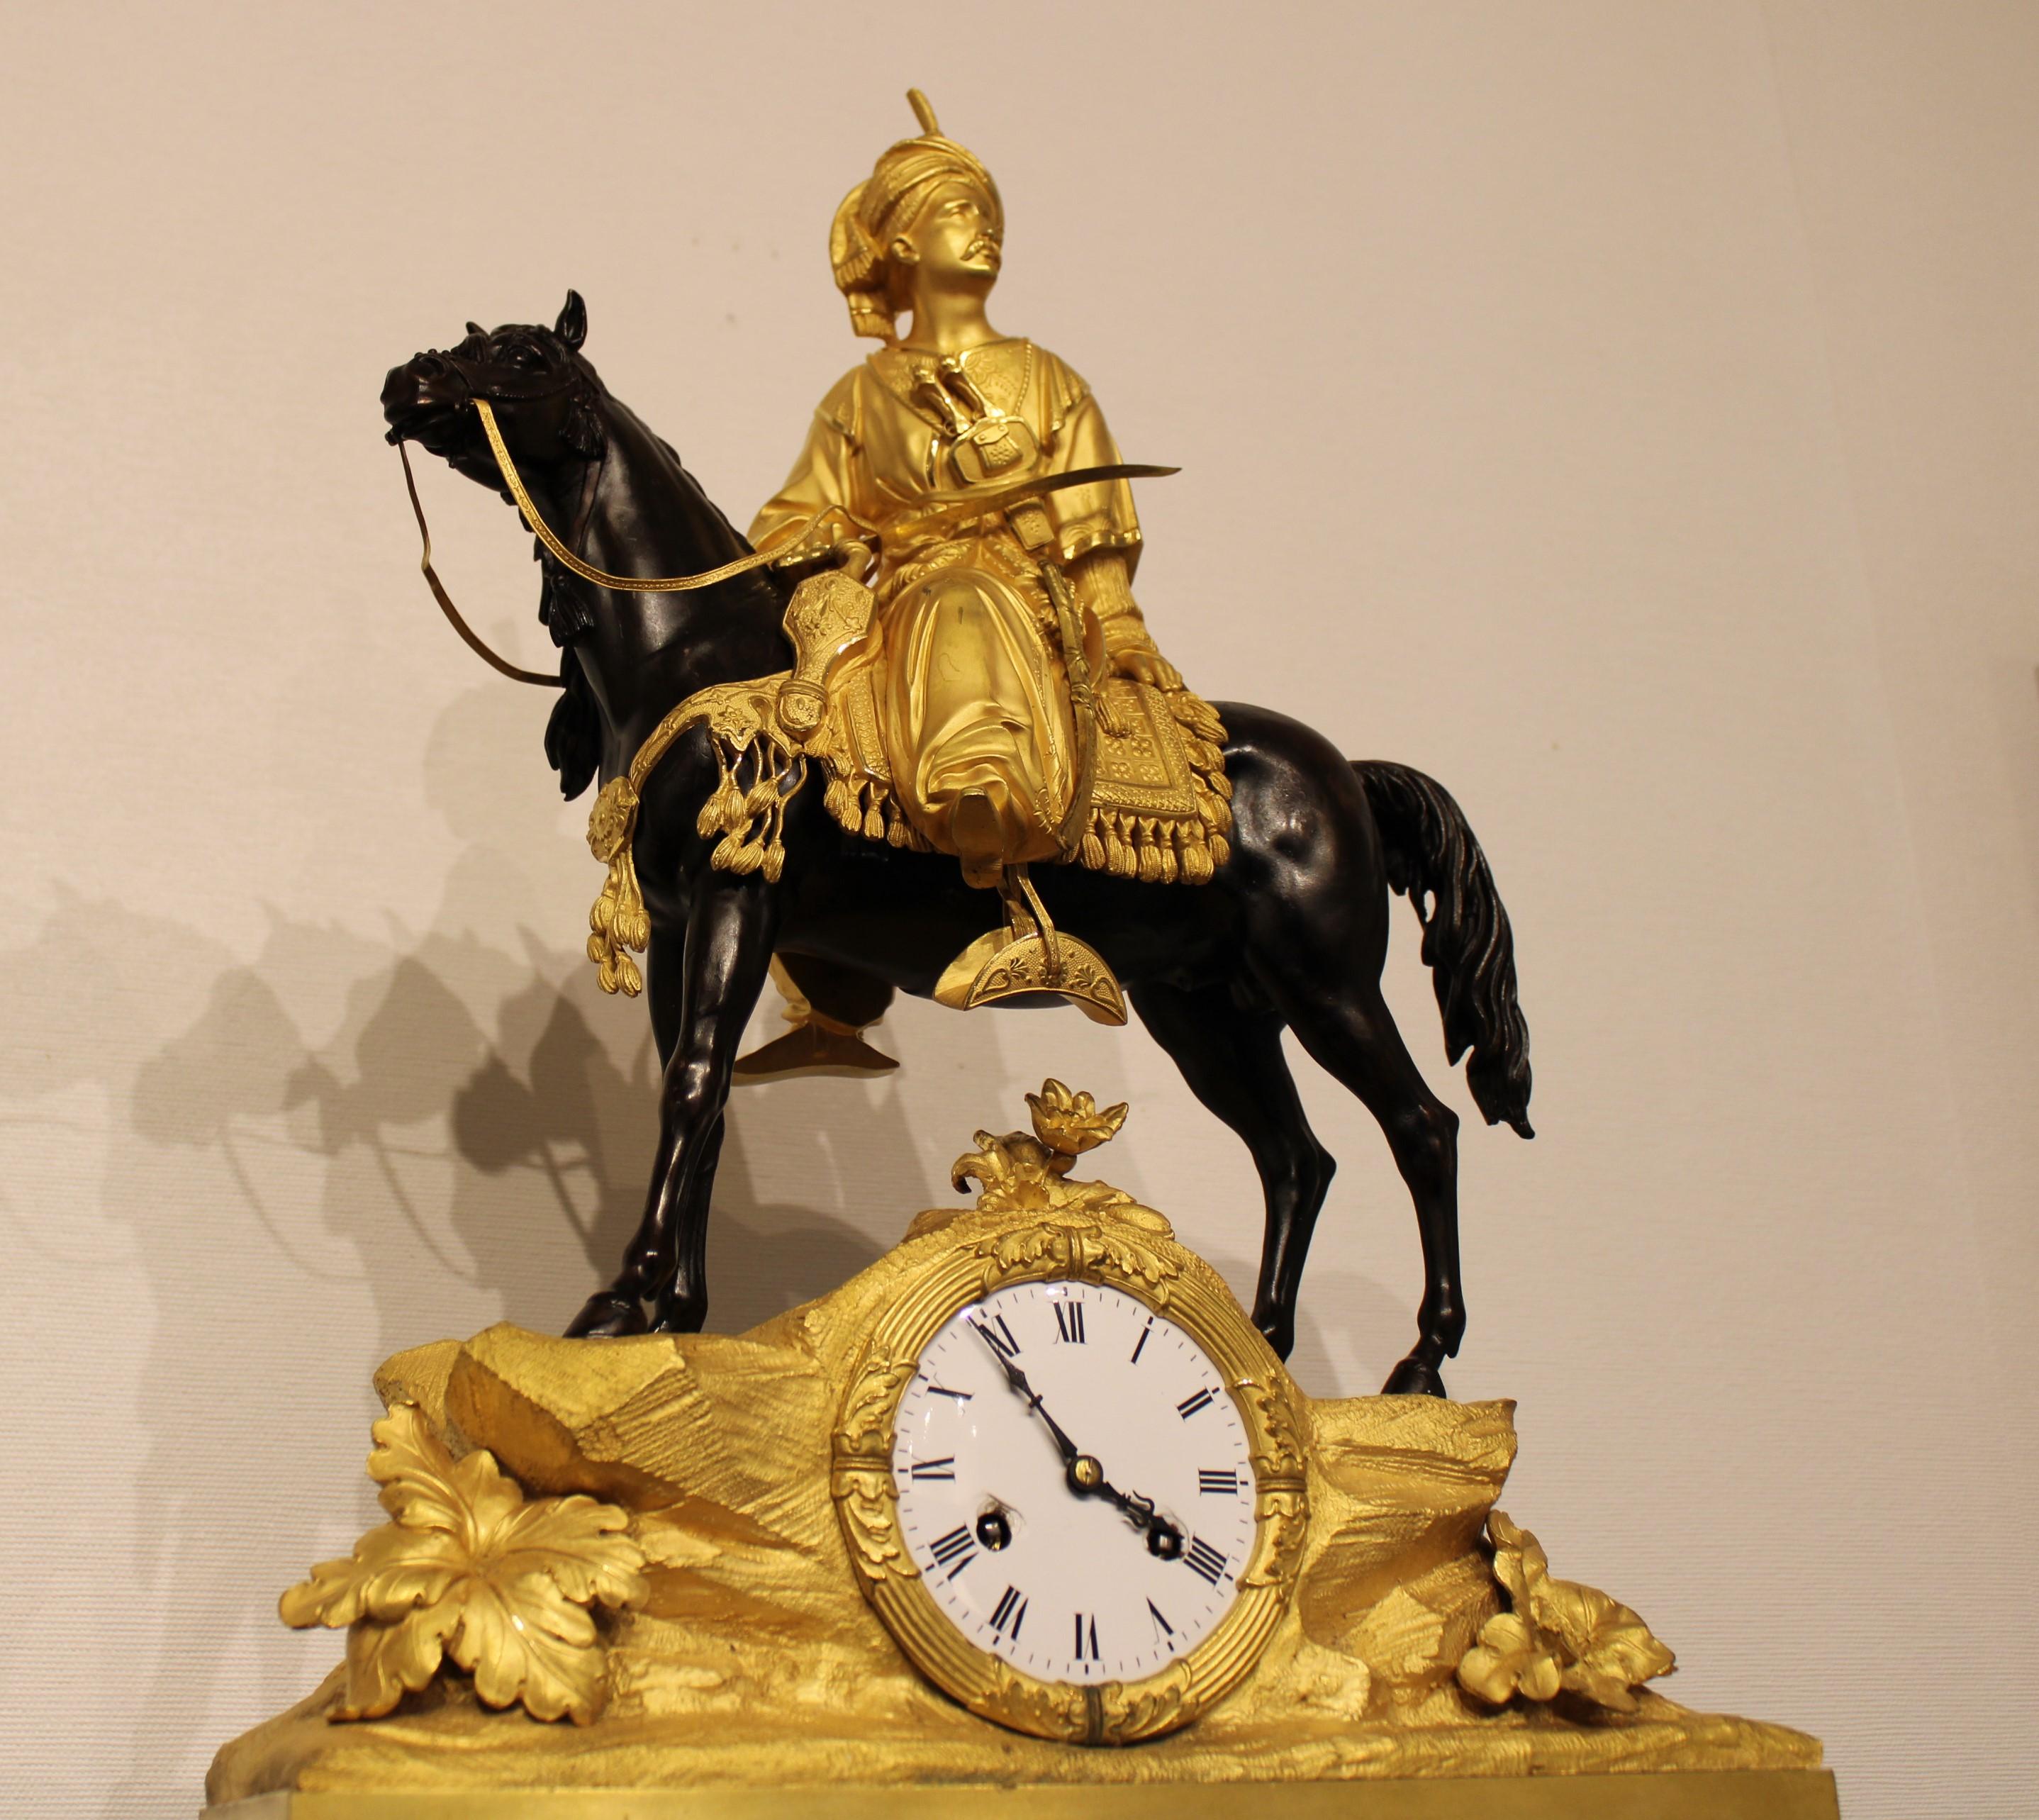 19th Century Orientalist table clock from the early 19th century